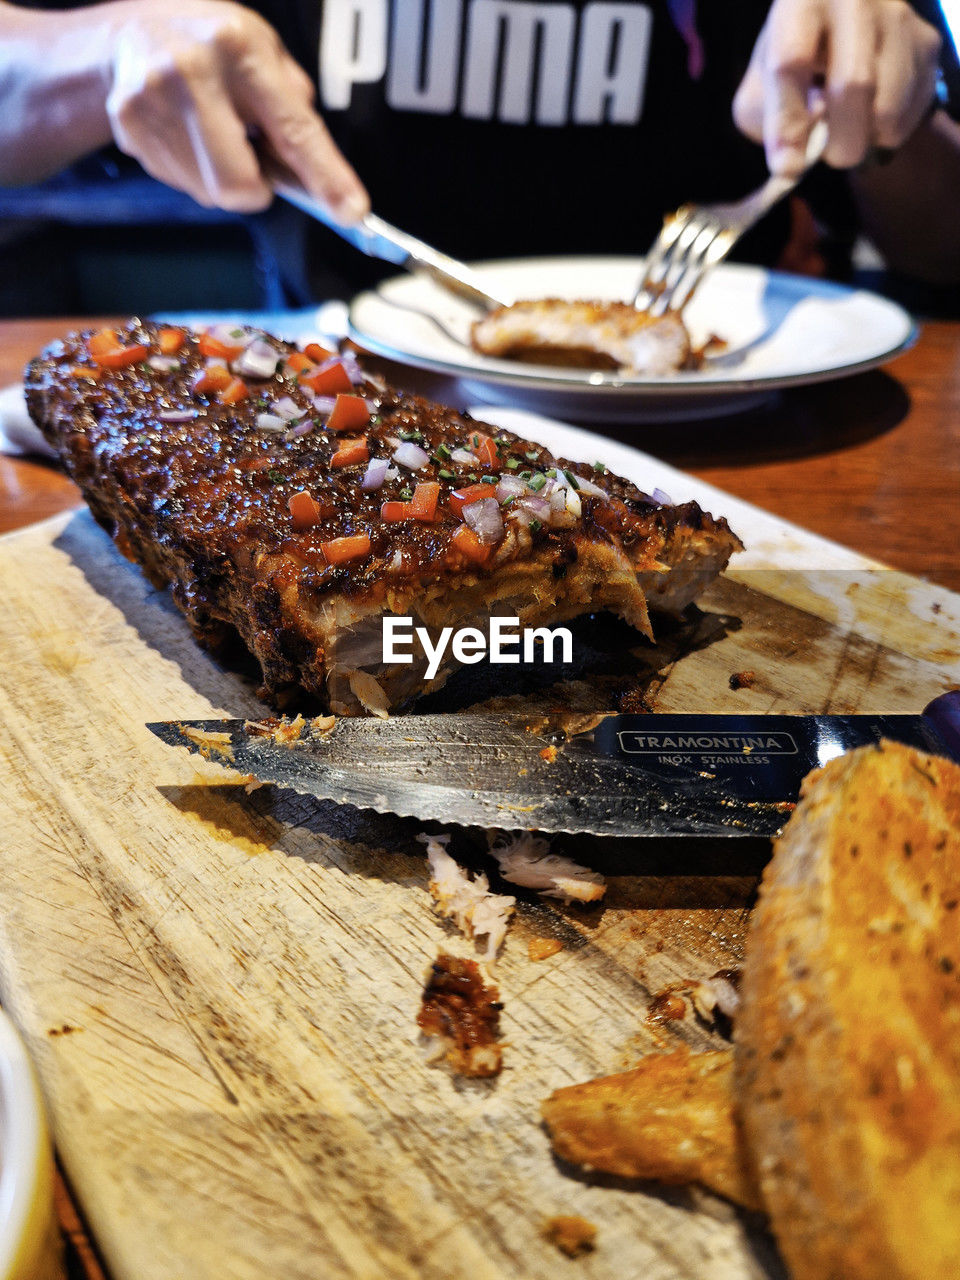 food, food and drink, dish, freshness, hand, meat, grilling, meal, roasted, table, indoors, healthy eating, cuisine, one person, wellbeing, fast food, eating utensil, cooking, dinner, eating, kitchen utensil, close-up, wood, adult, baked, kitchen knife, selective focus, barbecue, plate